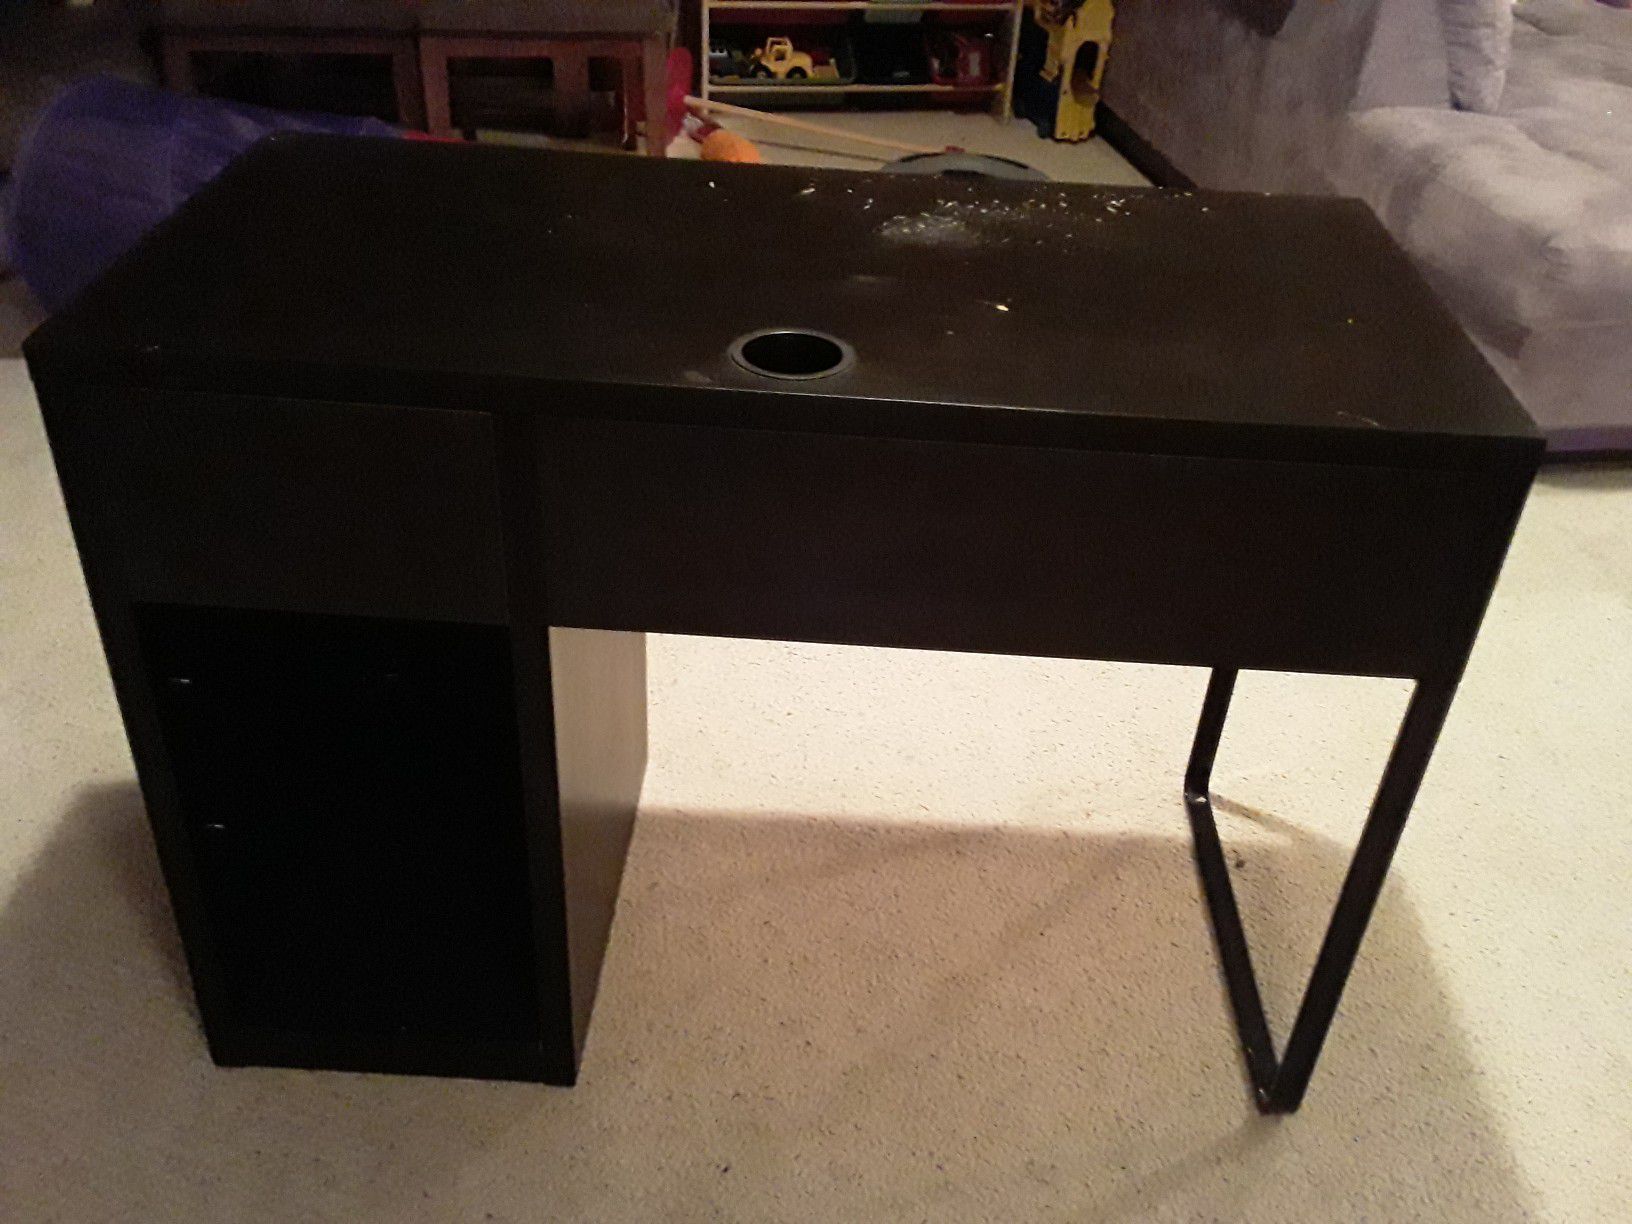 IKEA desk must sell today